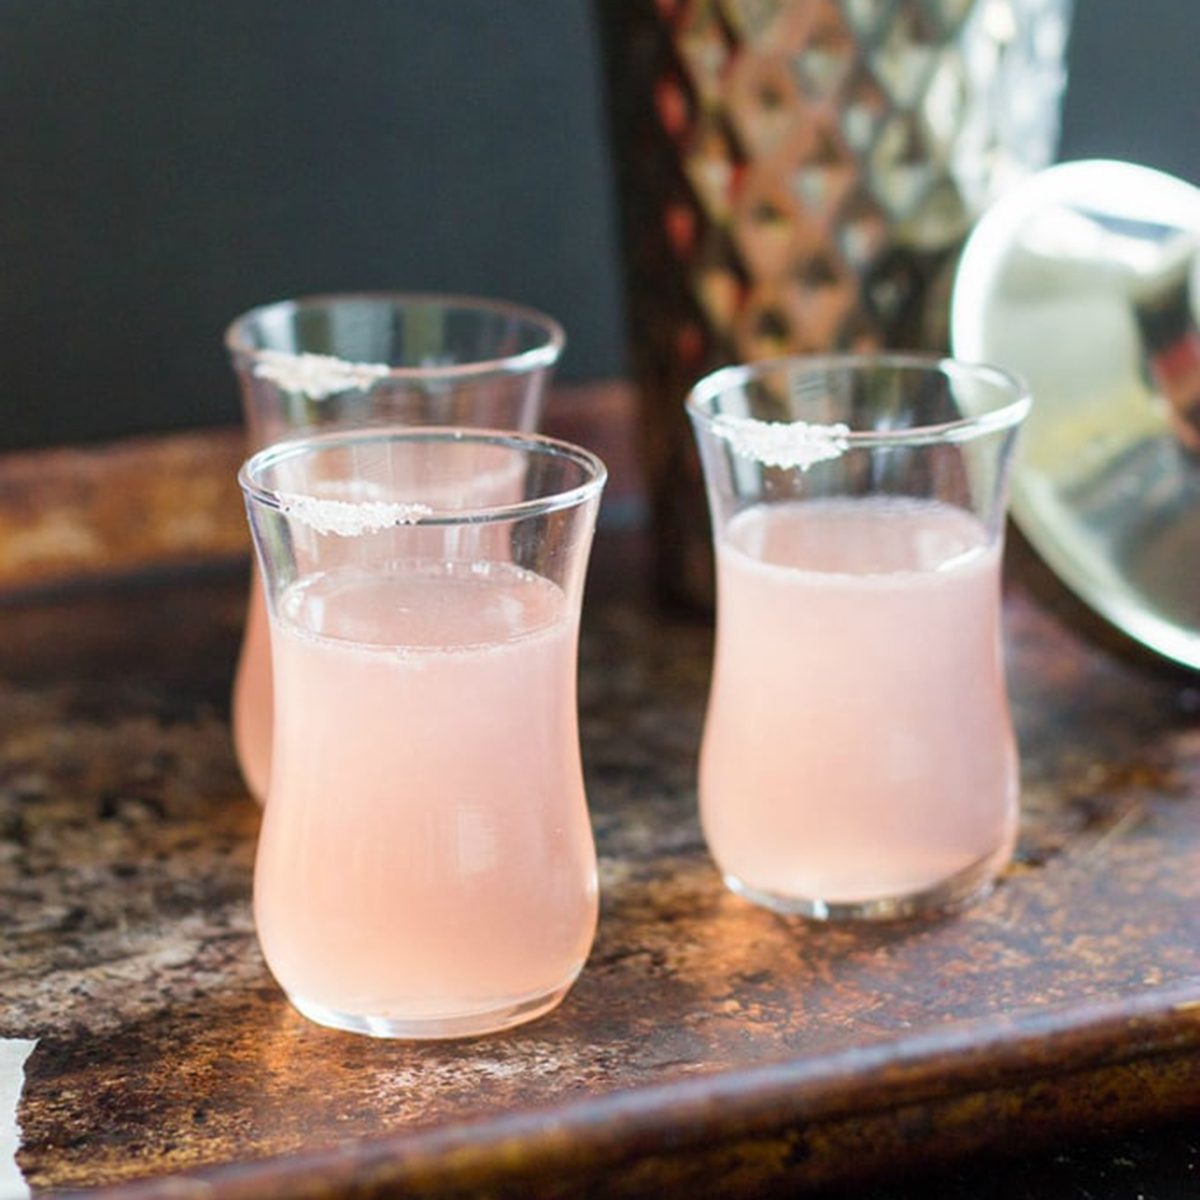 PALOMA PINK GRAPEFRUIT SHOT FOR HAPPY HOUR